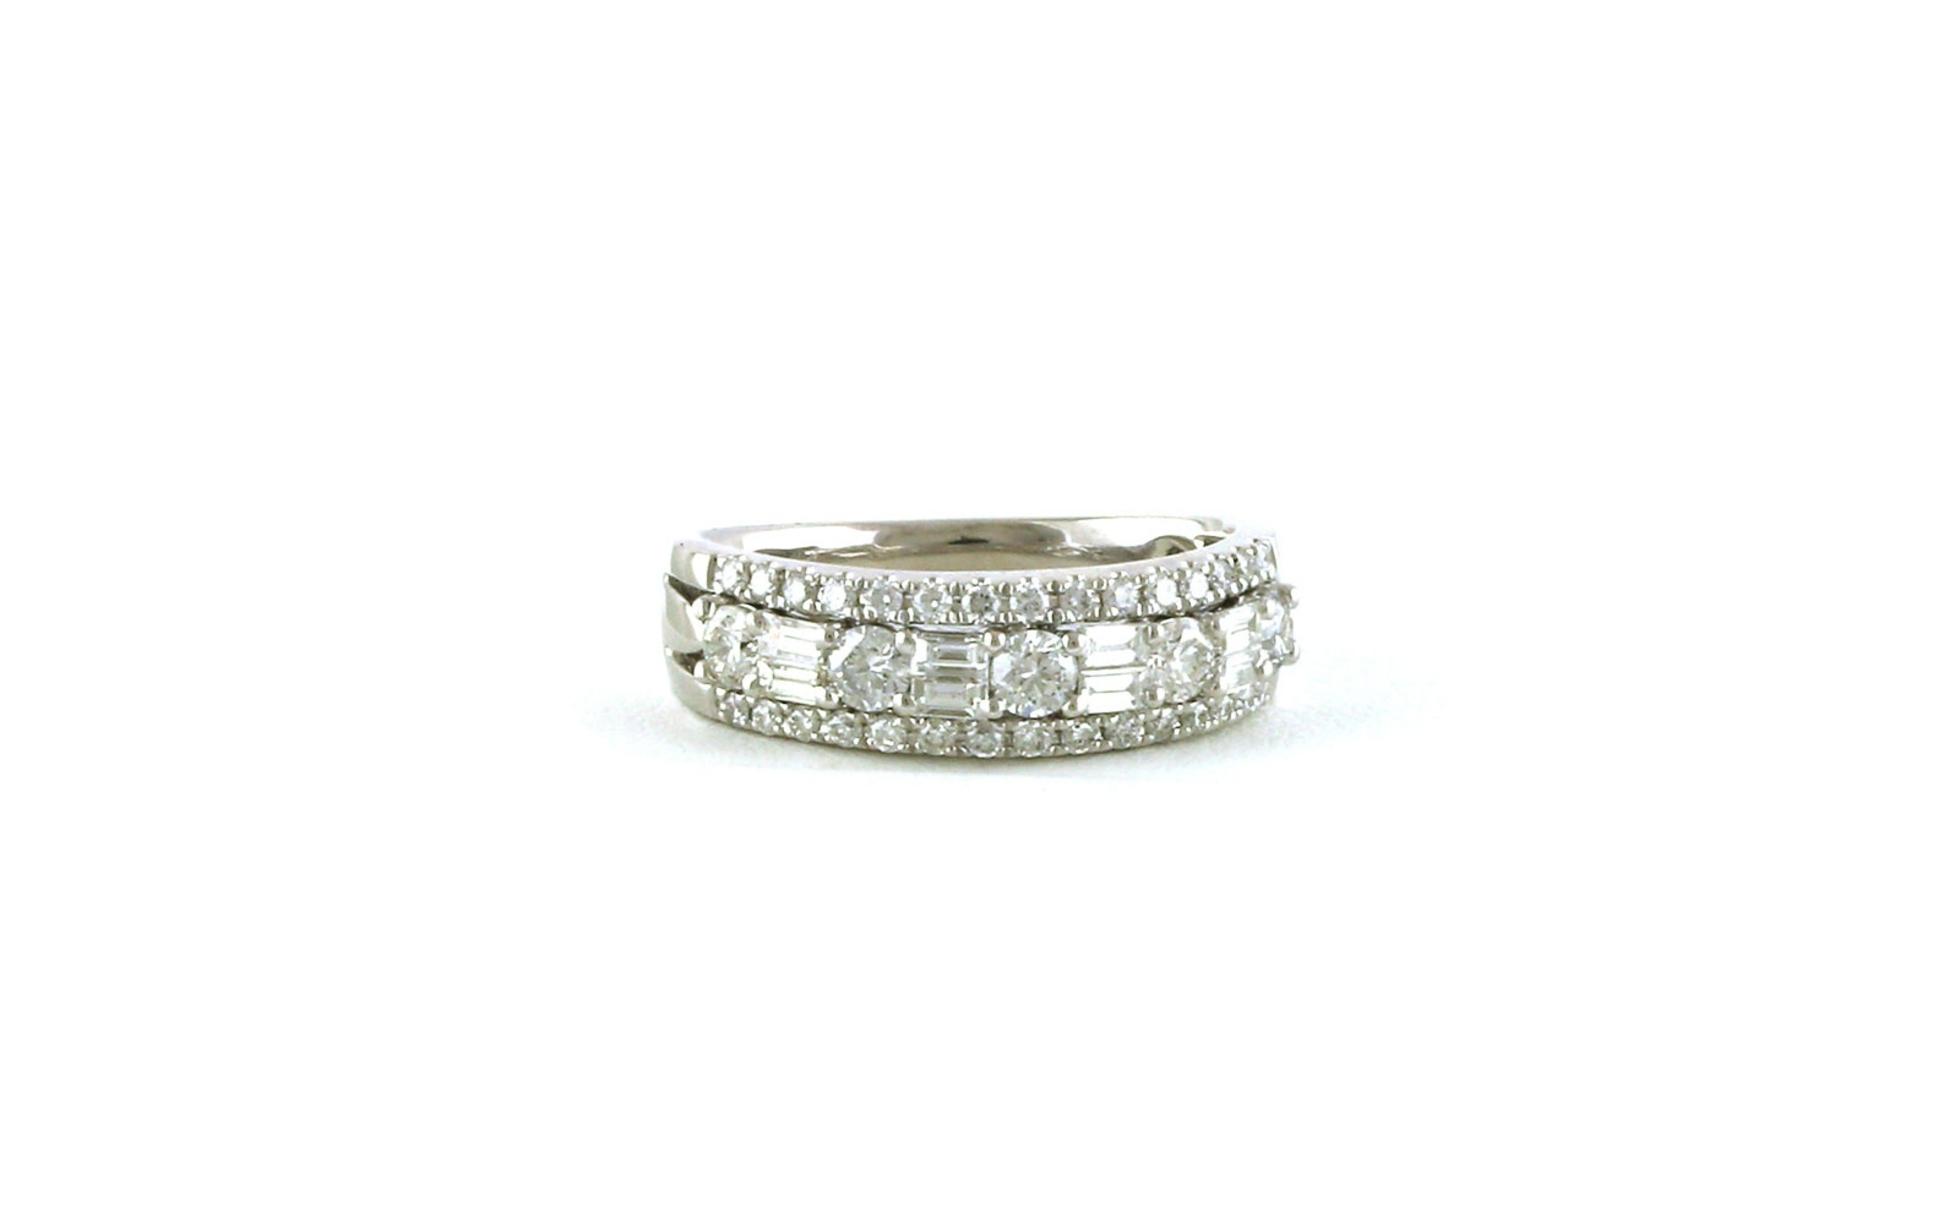 3-Row Pave and Alternating Stone Diamond Wedding Band in White Gold (0.74cts TWT)